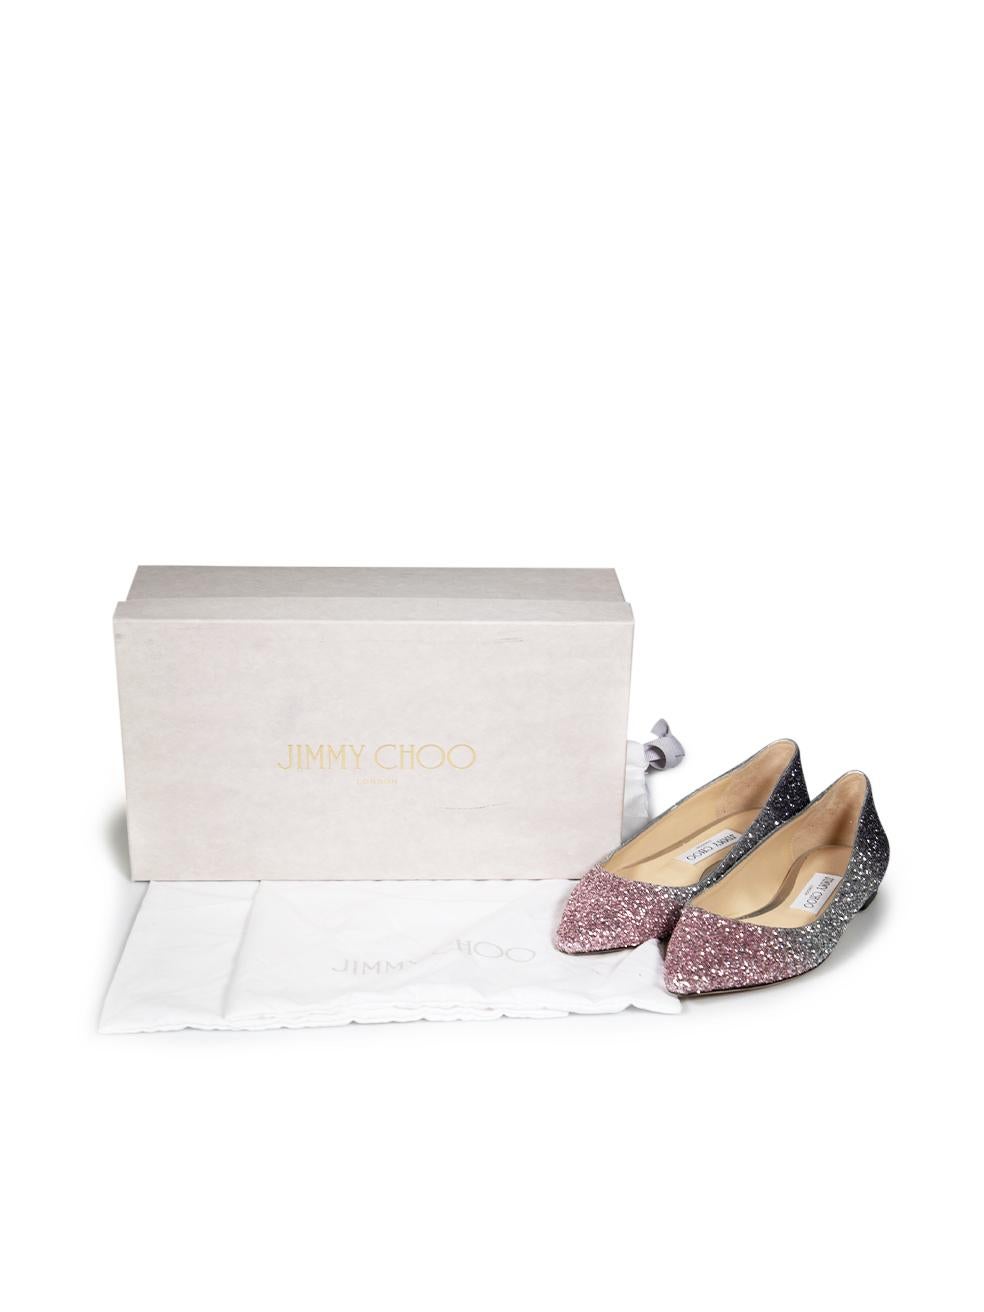 Jimmy Choo Glitter Accent Romy Flats Size IT 36 For Sale 1